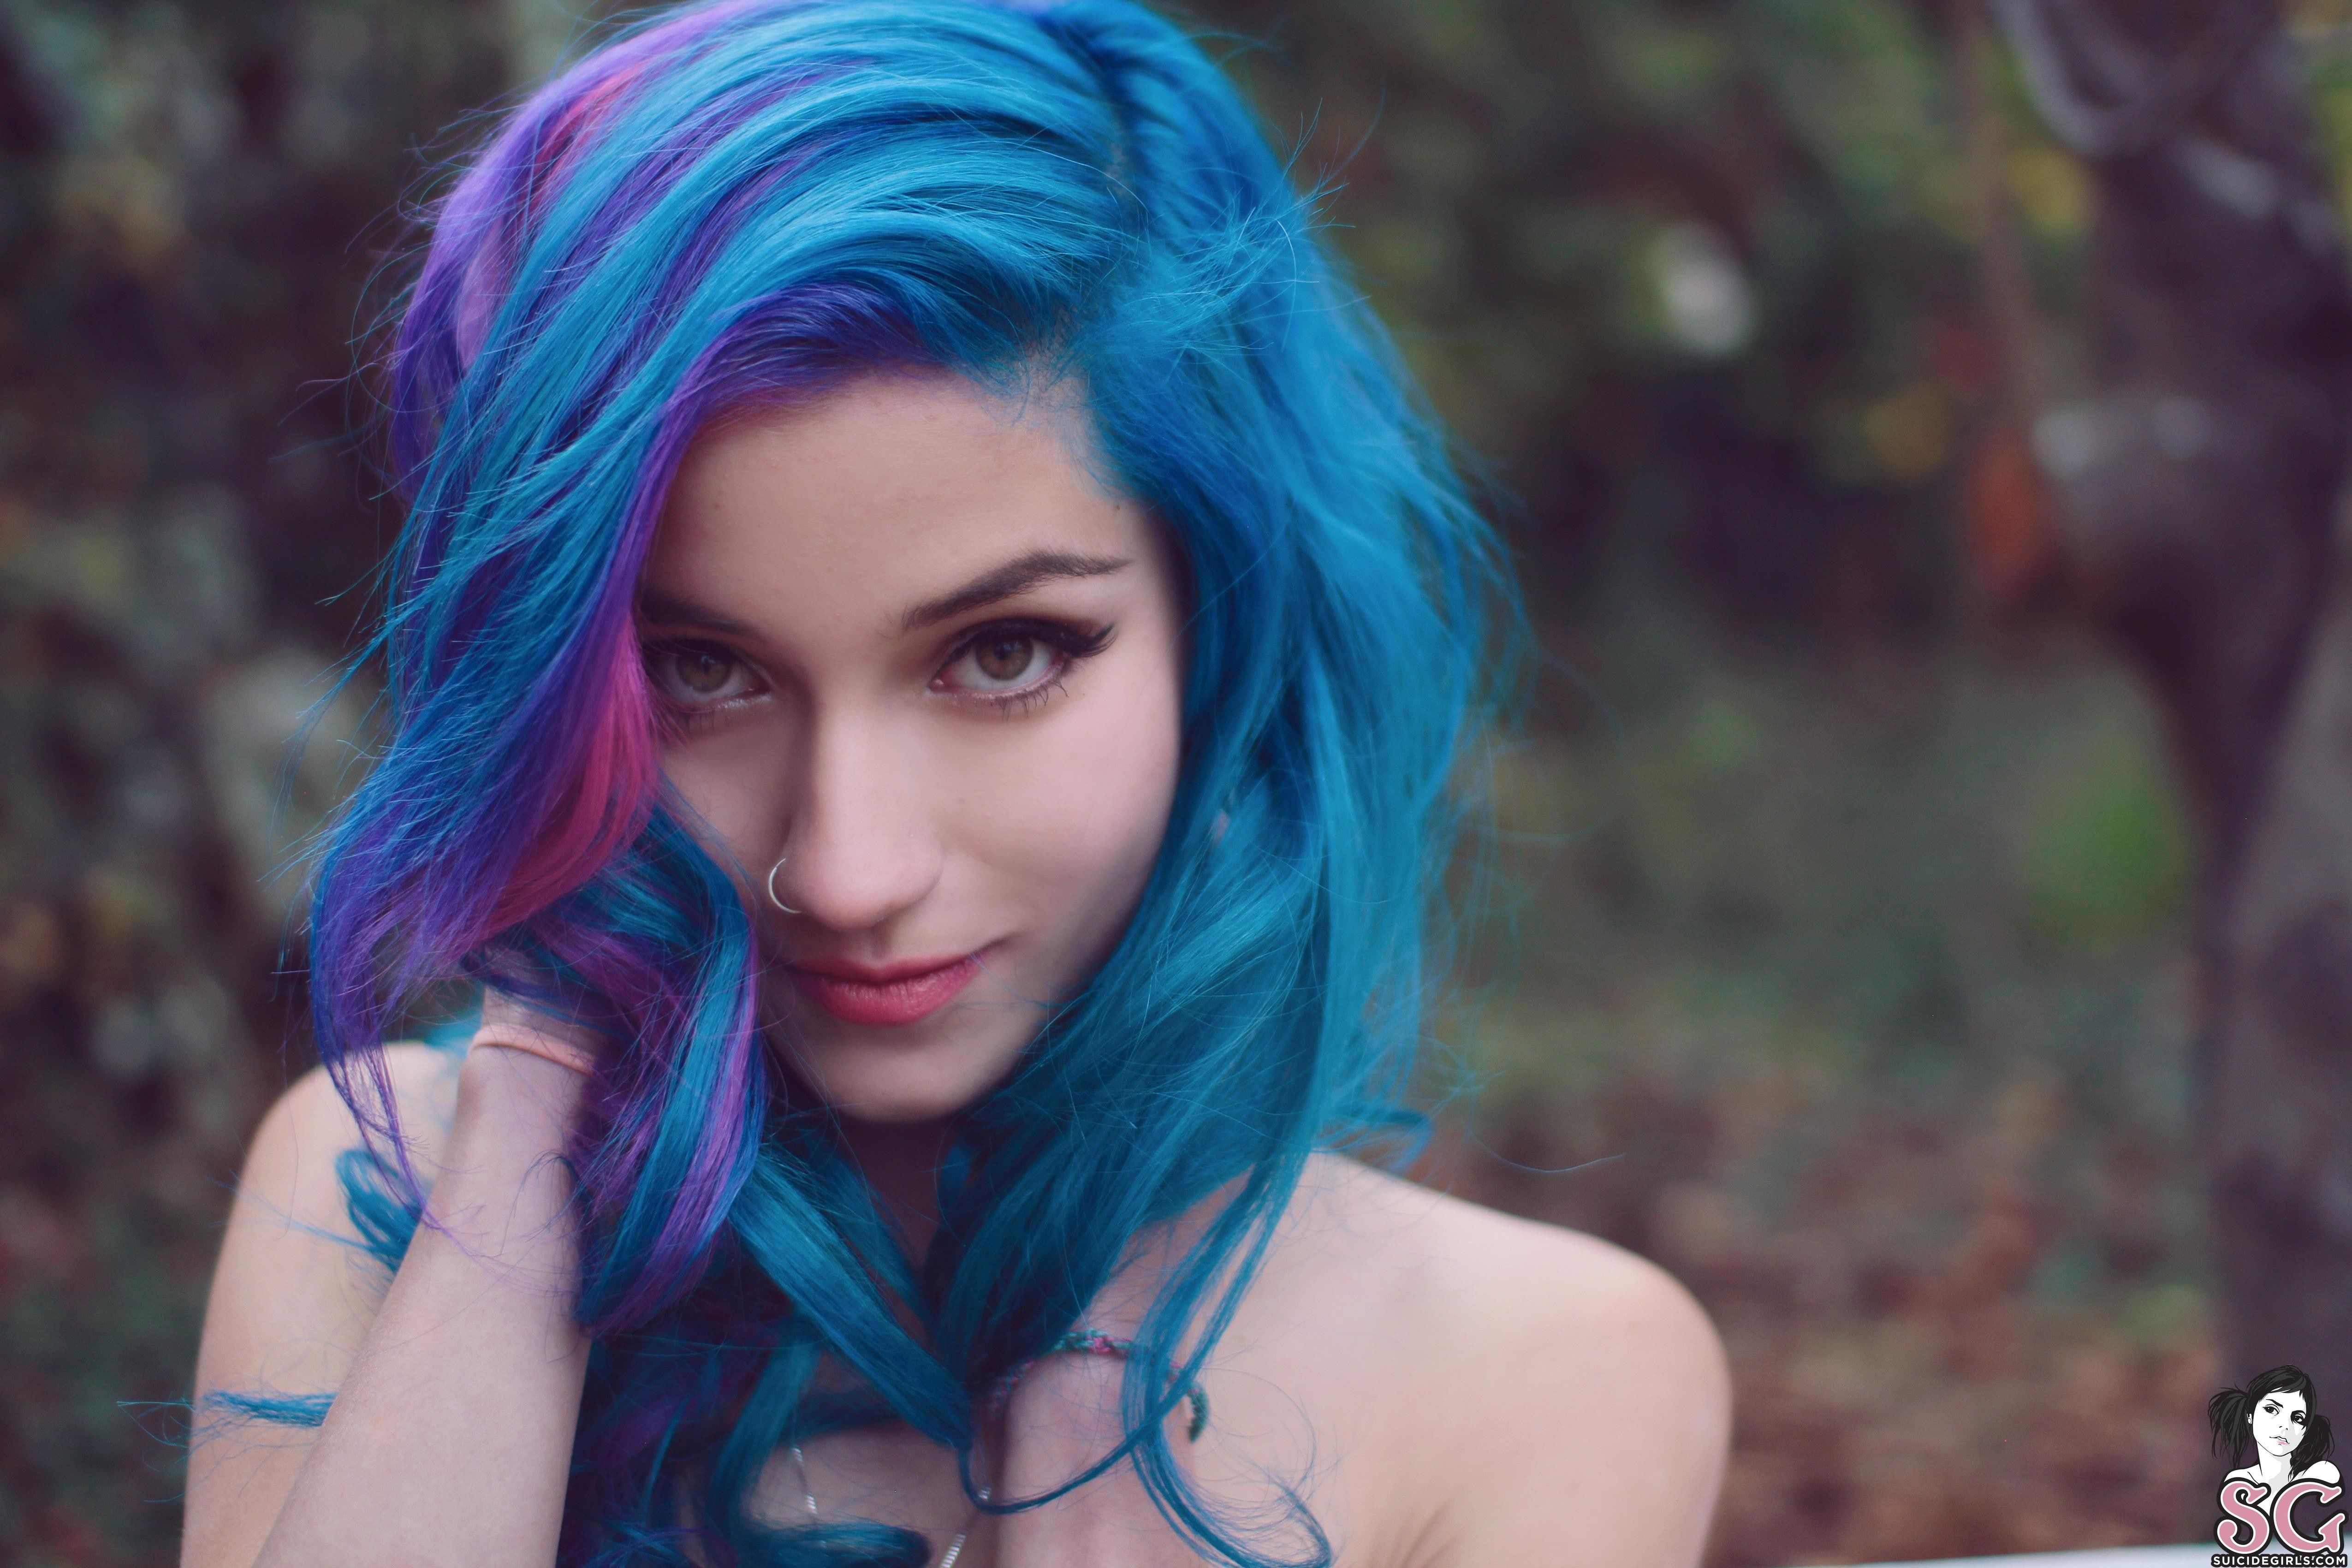 2. "10 Adorable Blue and Purple Hair Color Combinations" - wide 1